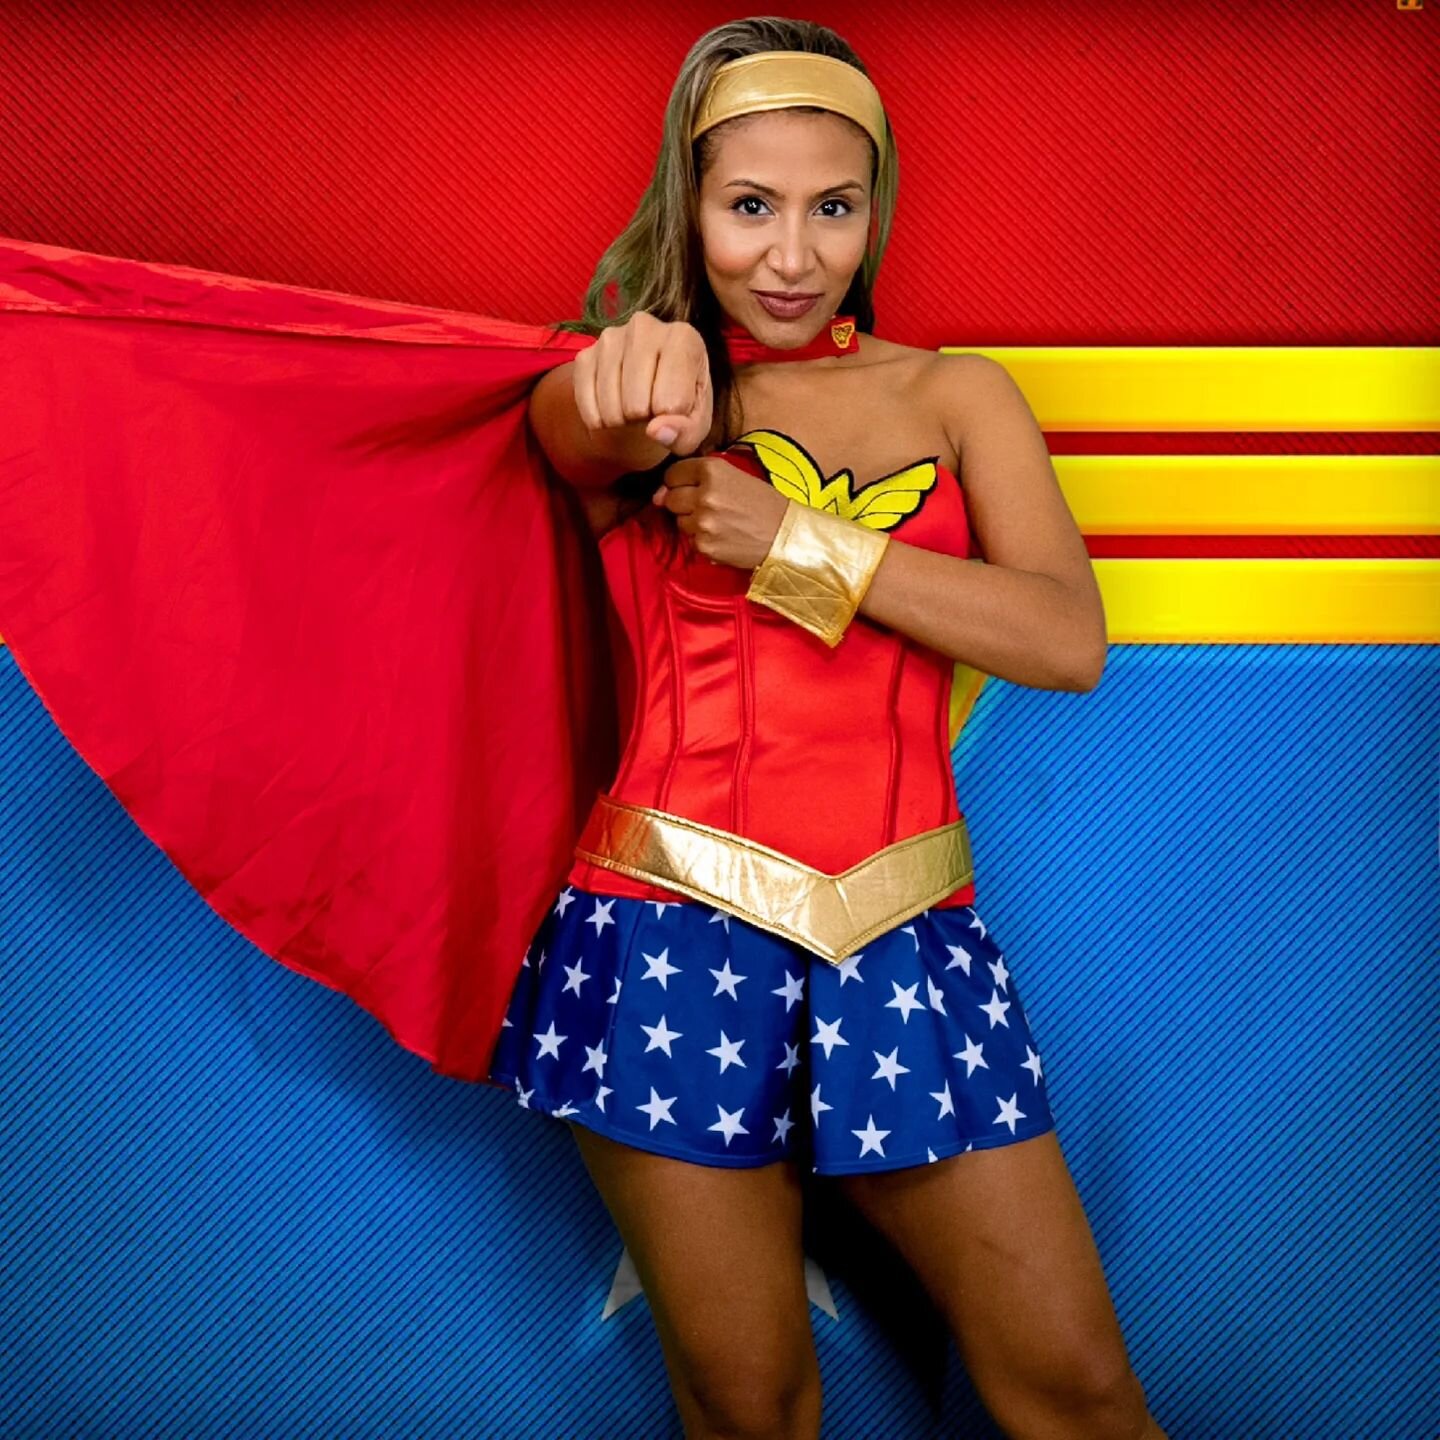 WONDERWOMAN💜💙💚
.
Wonderwoman is a really popular character request for my parties. One of the things I like to do with  our mini super heros is to get them to show me their best superhero poses. So much fun! 
.
Don't forget I offer....
.
Magic, Pa